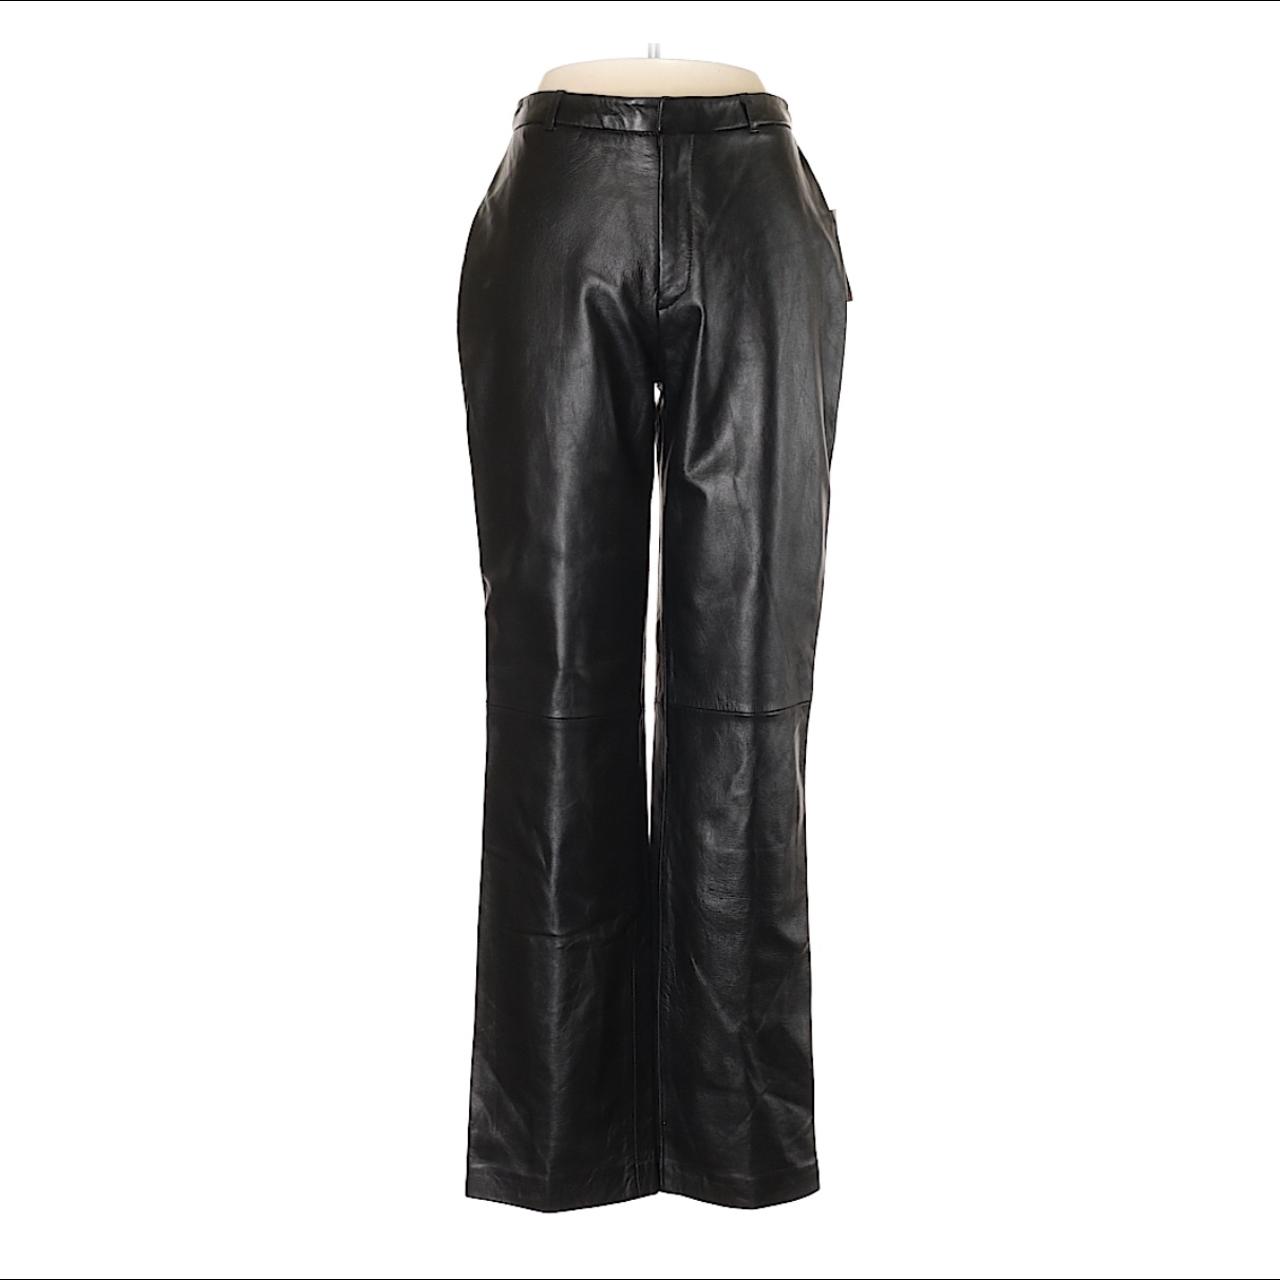 Jaclyn Smith Classic Genuine Leather Pants These... - Depop